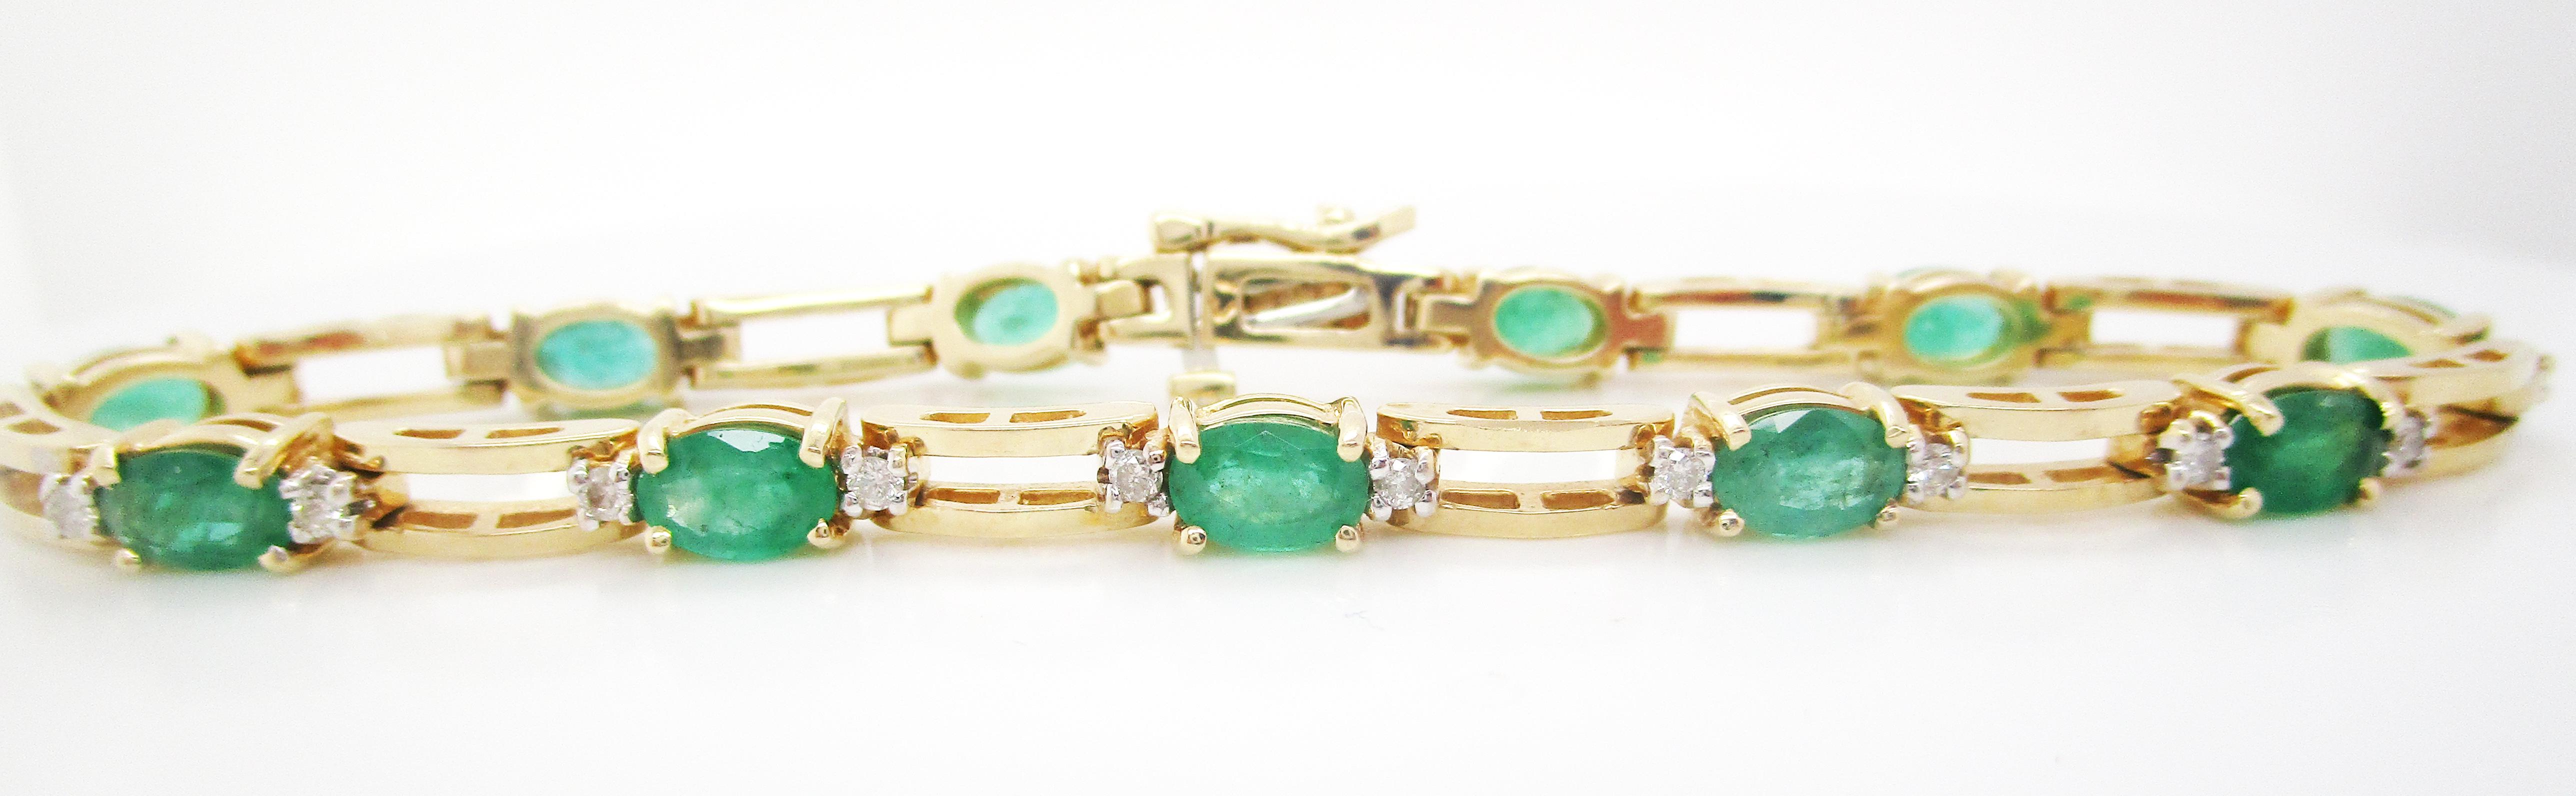 This is a gorgeous mid-century bracelet featuring a stunning selection of emeralds and diamonds in a classic straight line look! The combination of warm yellow gold, rich green emeralds, and bright white diamonds is striking and beautiful! This